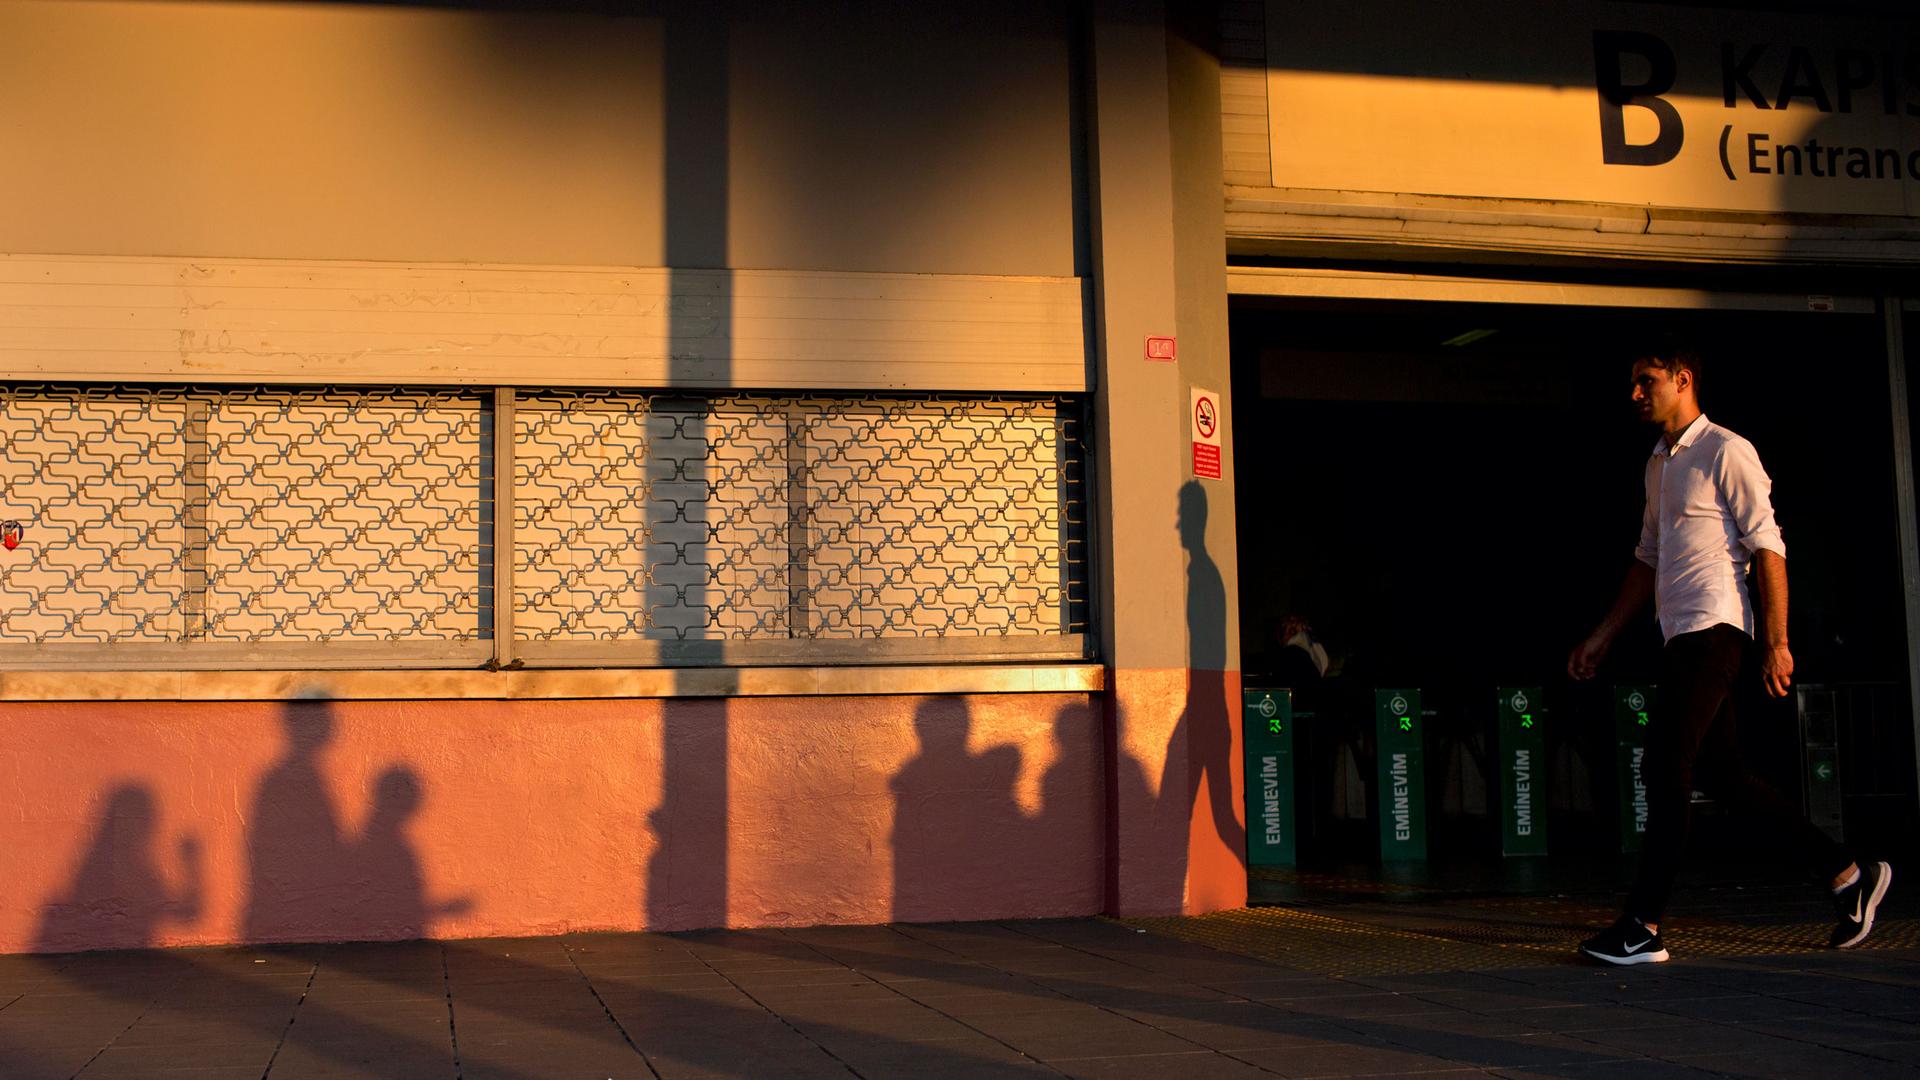 A man is shown walking in front of a metro stop in Istanbul at dusk with the long shadow of several other people on the wall.